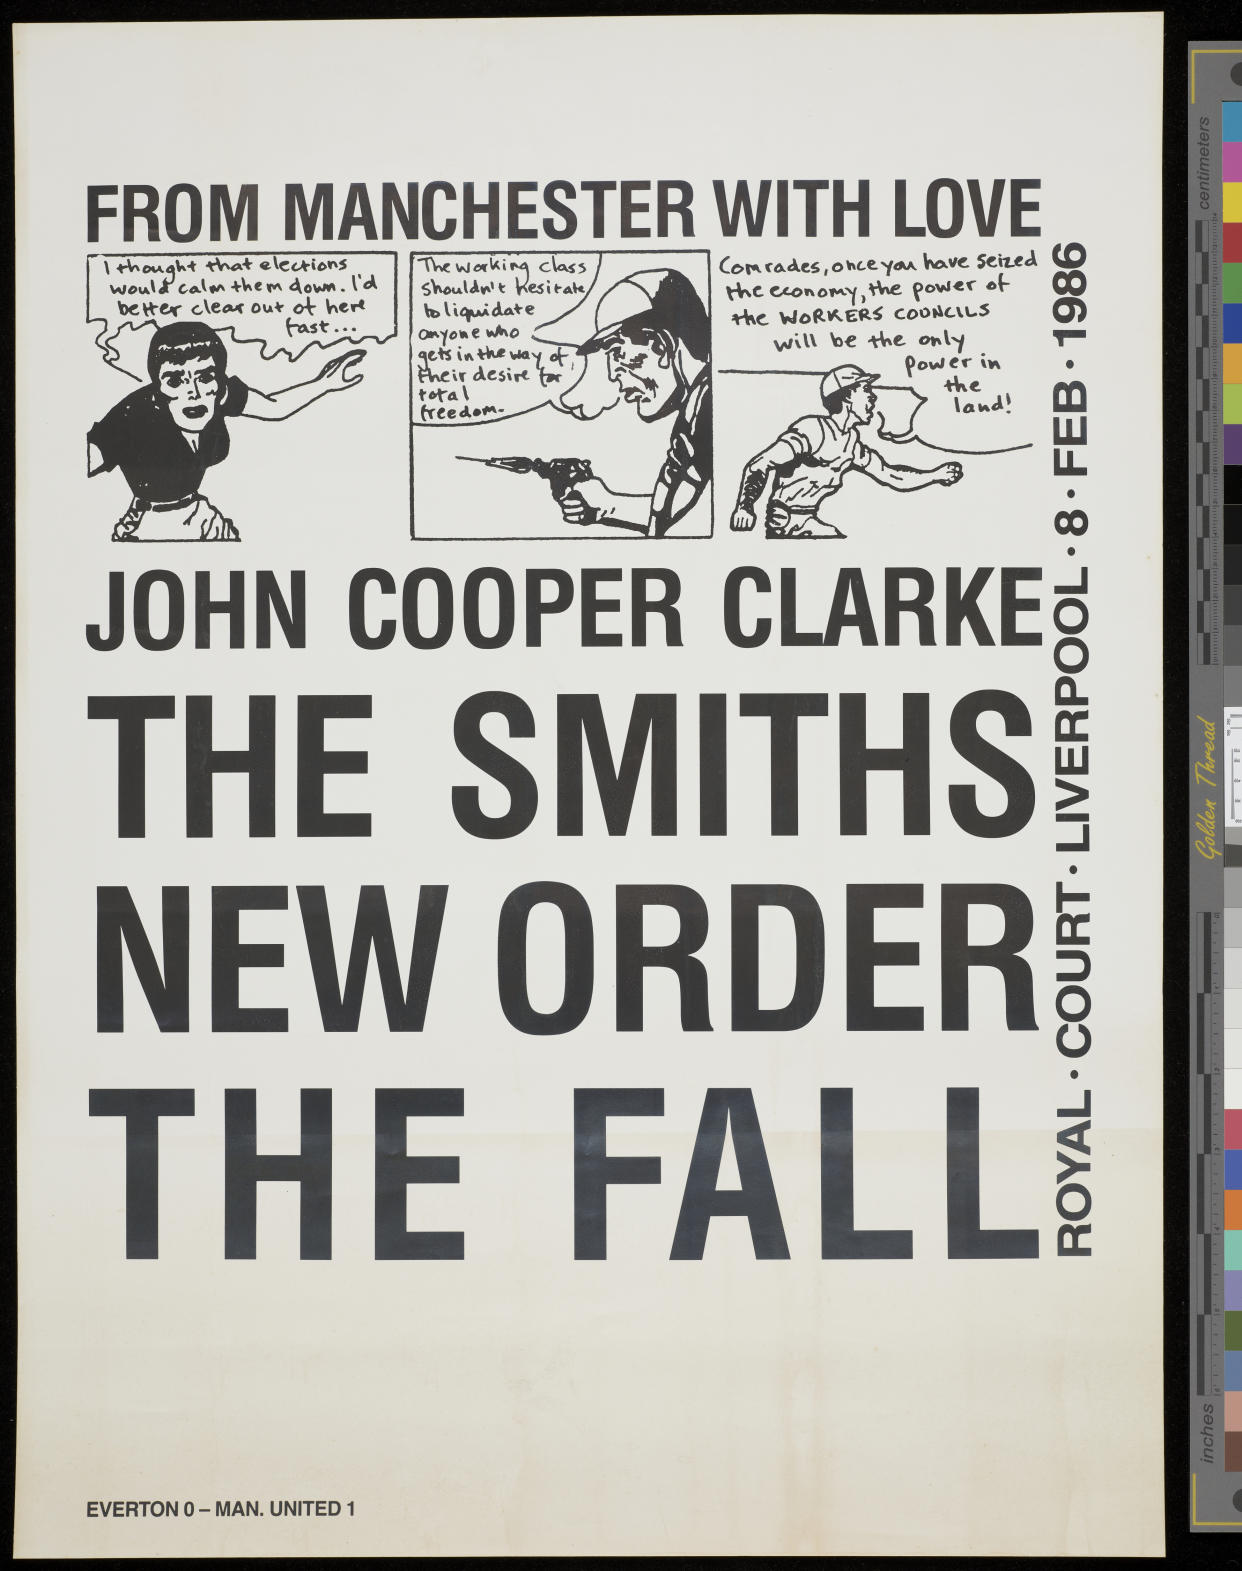 From Manchester With Love poster designed in 1986 (The University of Manchester/PA)